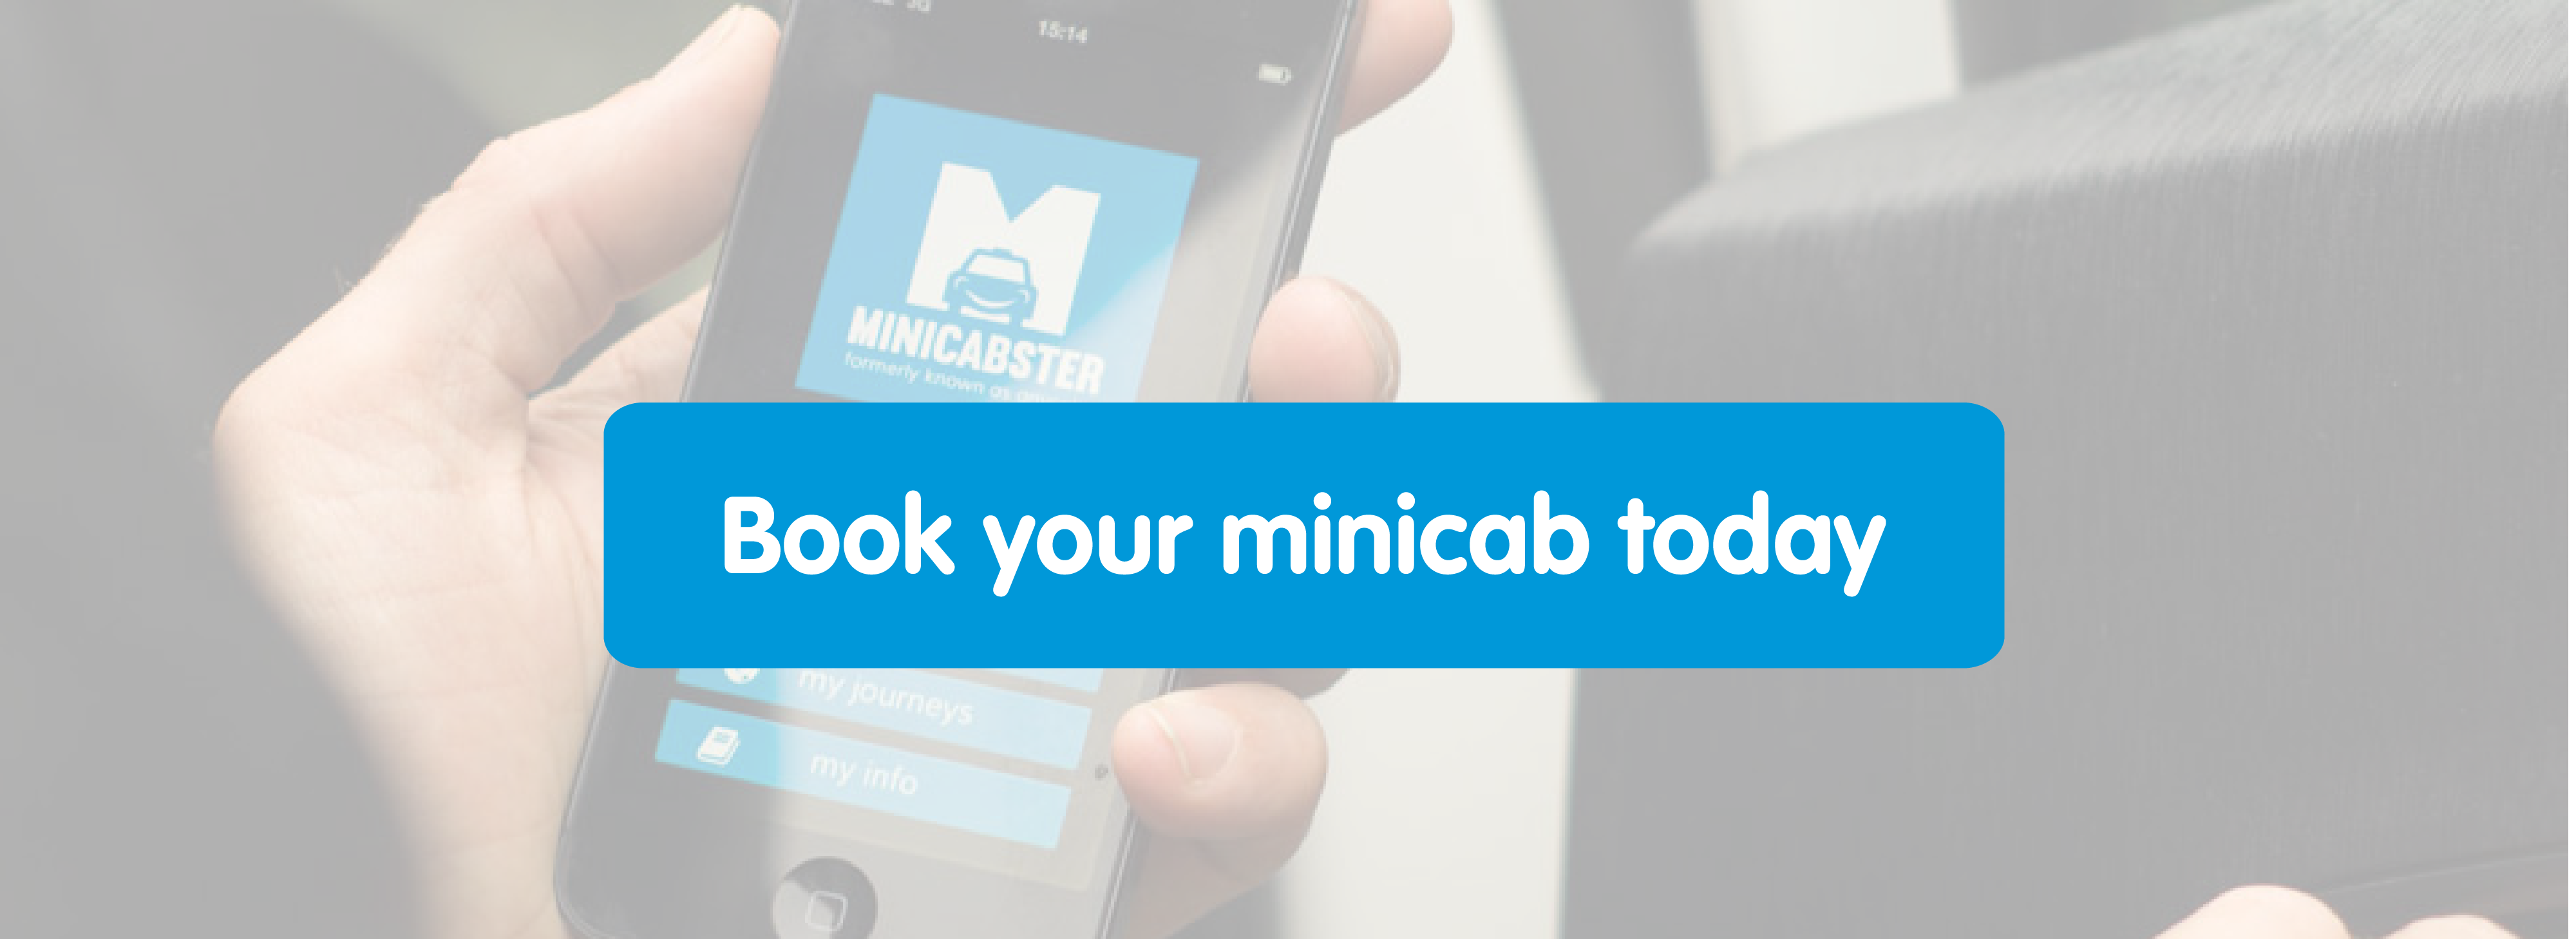 minicabster-review